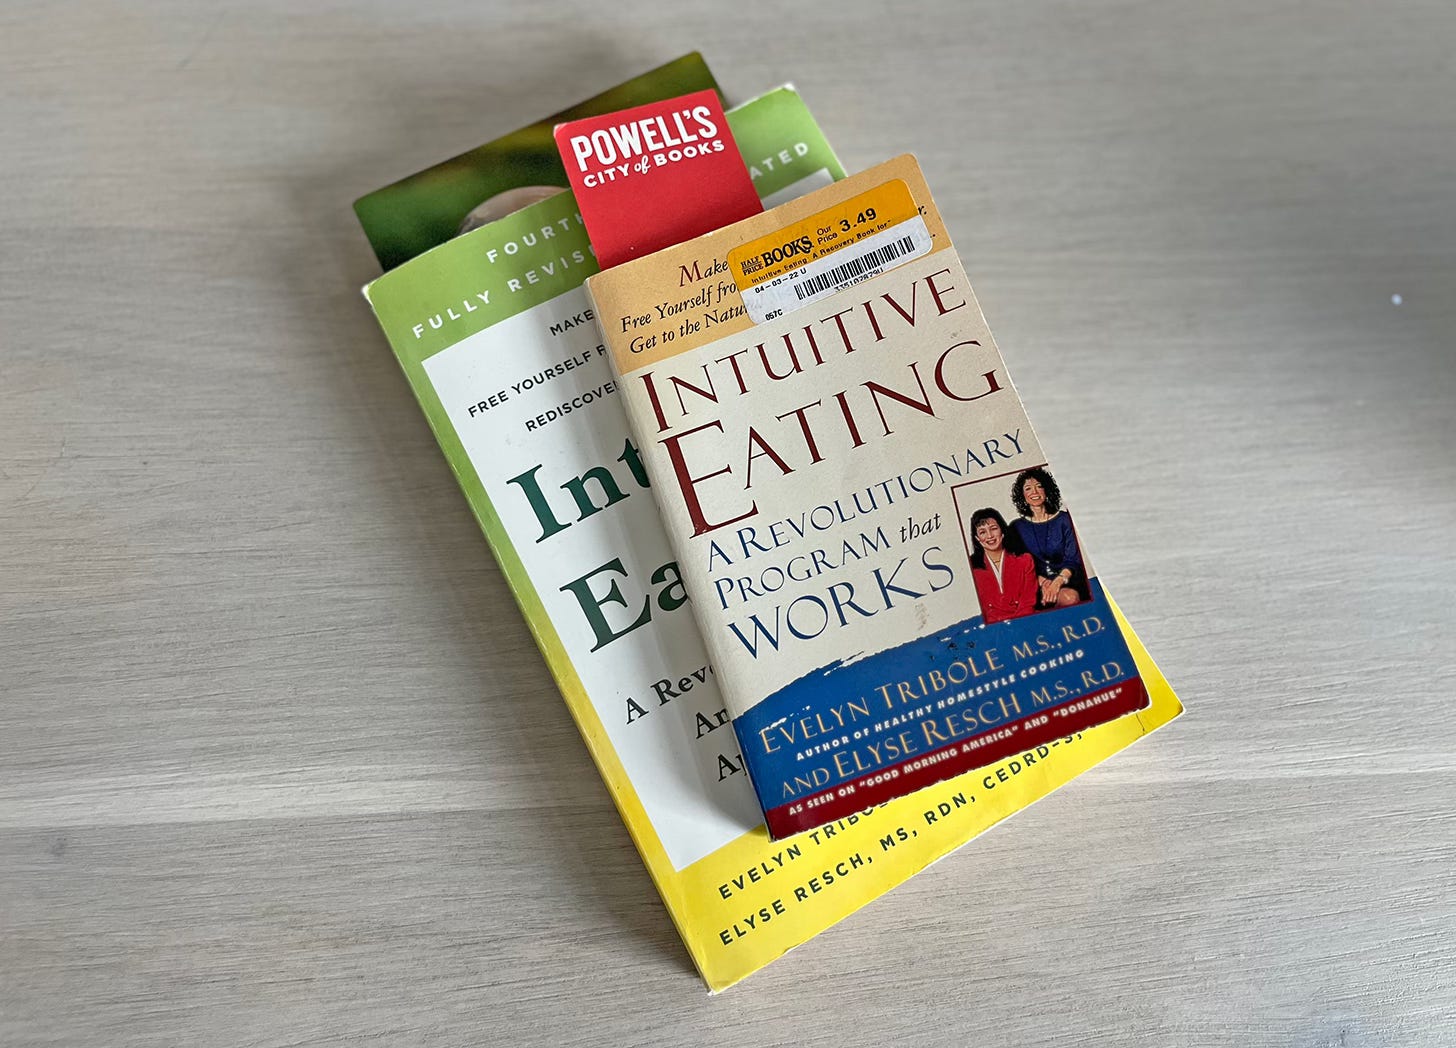 Intuitive Eating by Evelyn Tribole and Elyse Resch